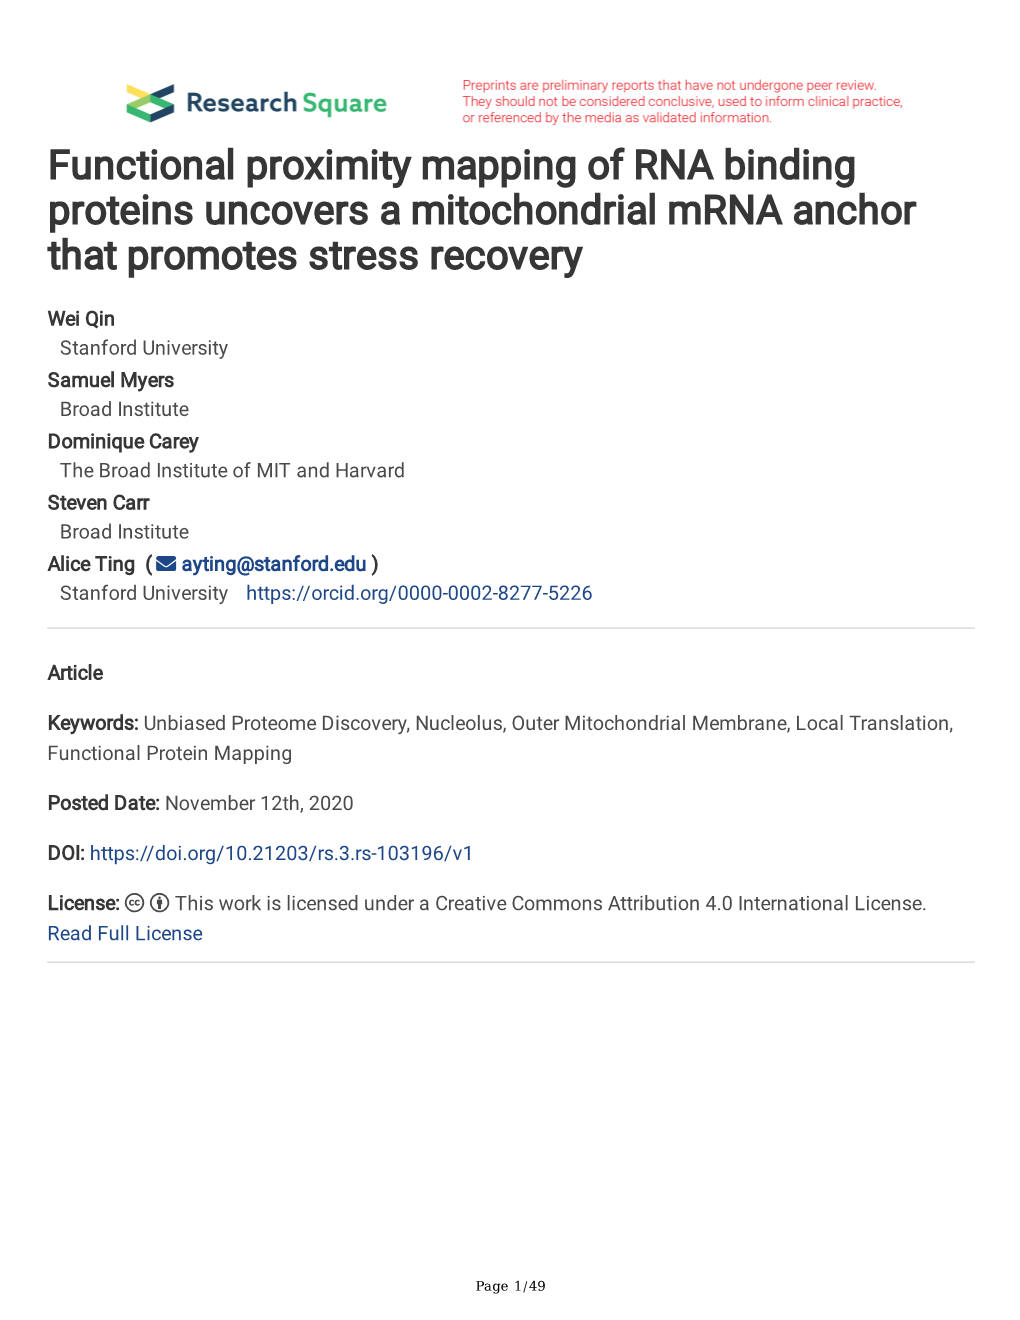 Functional Proximity Mapping of RNA Binding Proteins Uncovers a Mitochondrial Mrna Anchor That Promotes Stress Recovery